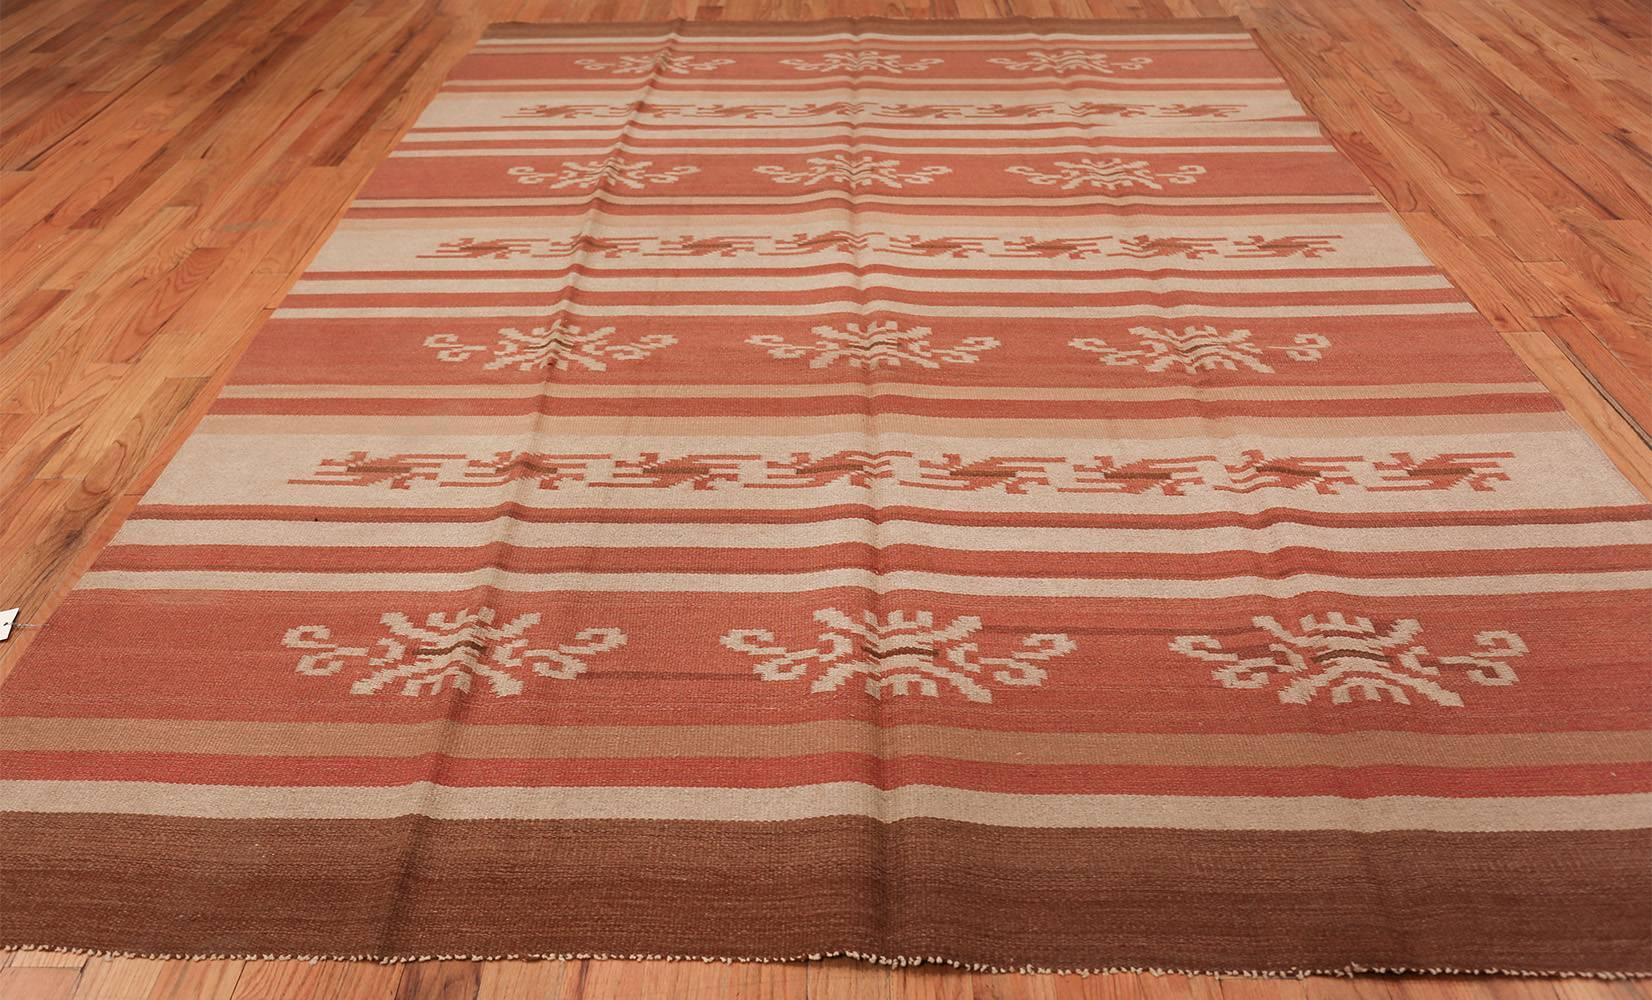 Scandinavian  Vintage Swedish Kilim Rug, Country Of Origin: Sweden, Circa Date: Second Quarter Of The 20th Century – Vintage Swedish kilims are unique because of their elegant simplicity. They often showcase simple designs and straightforward colors